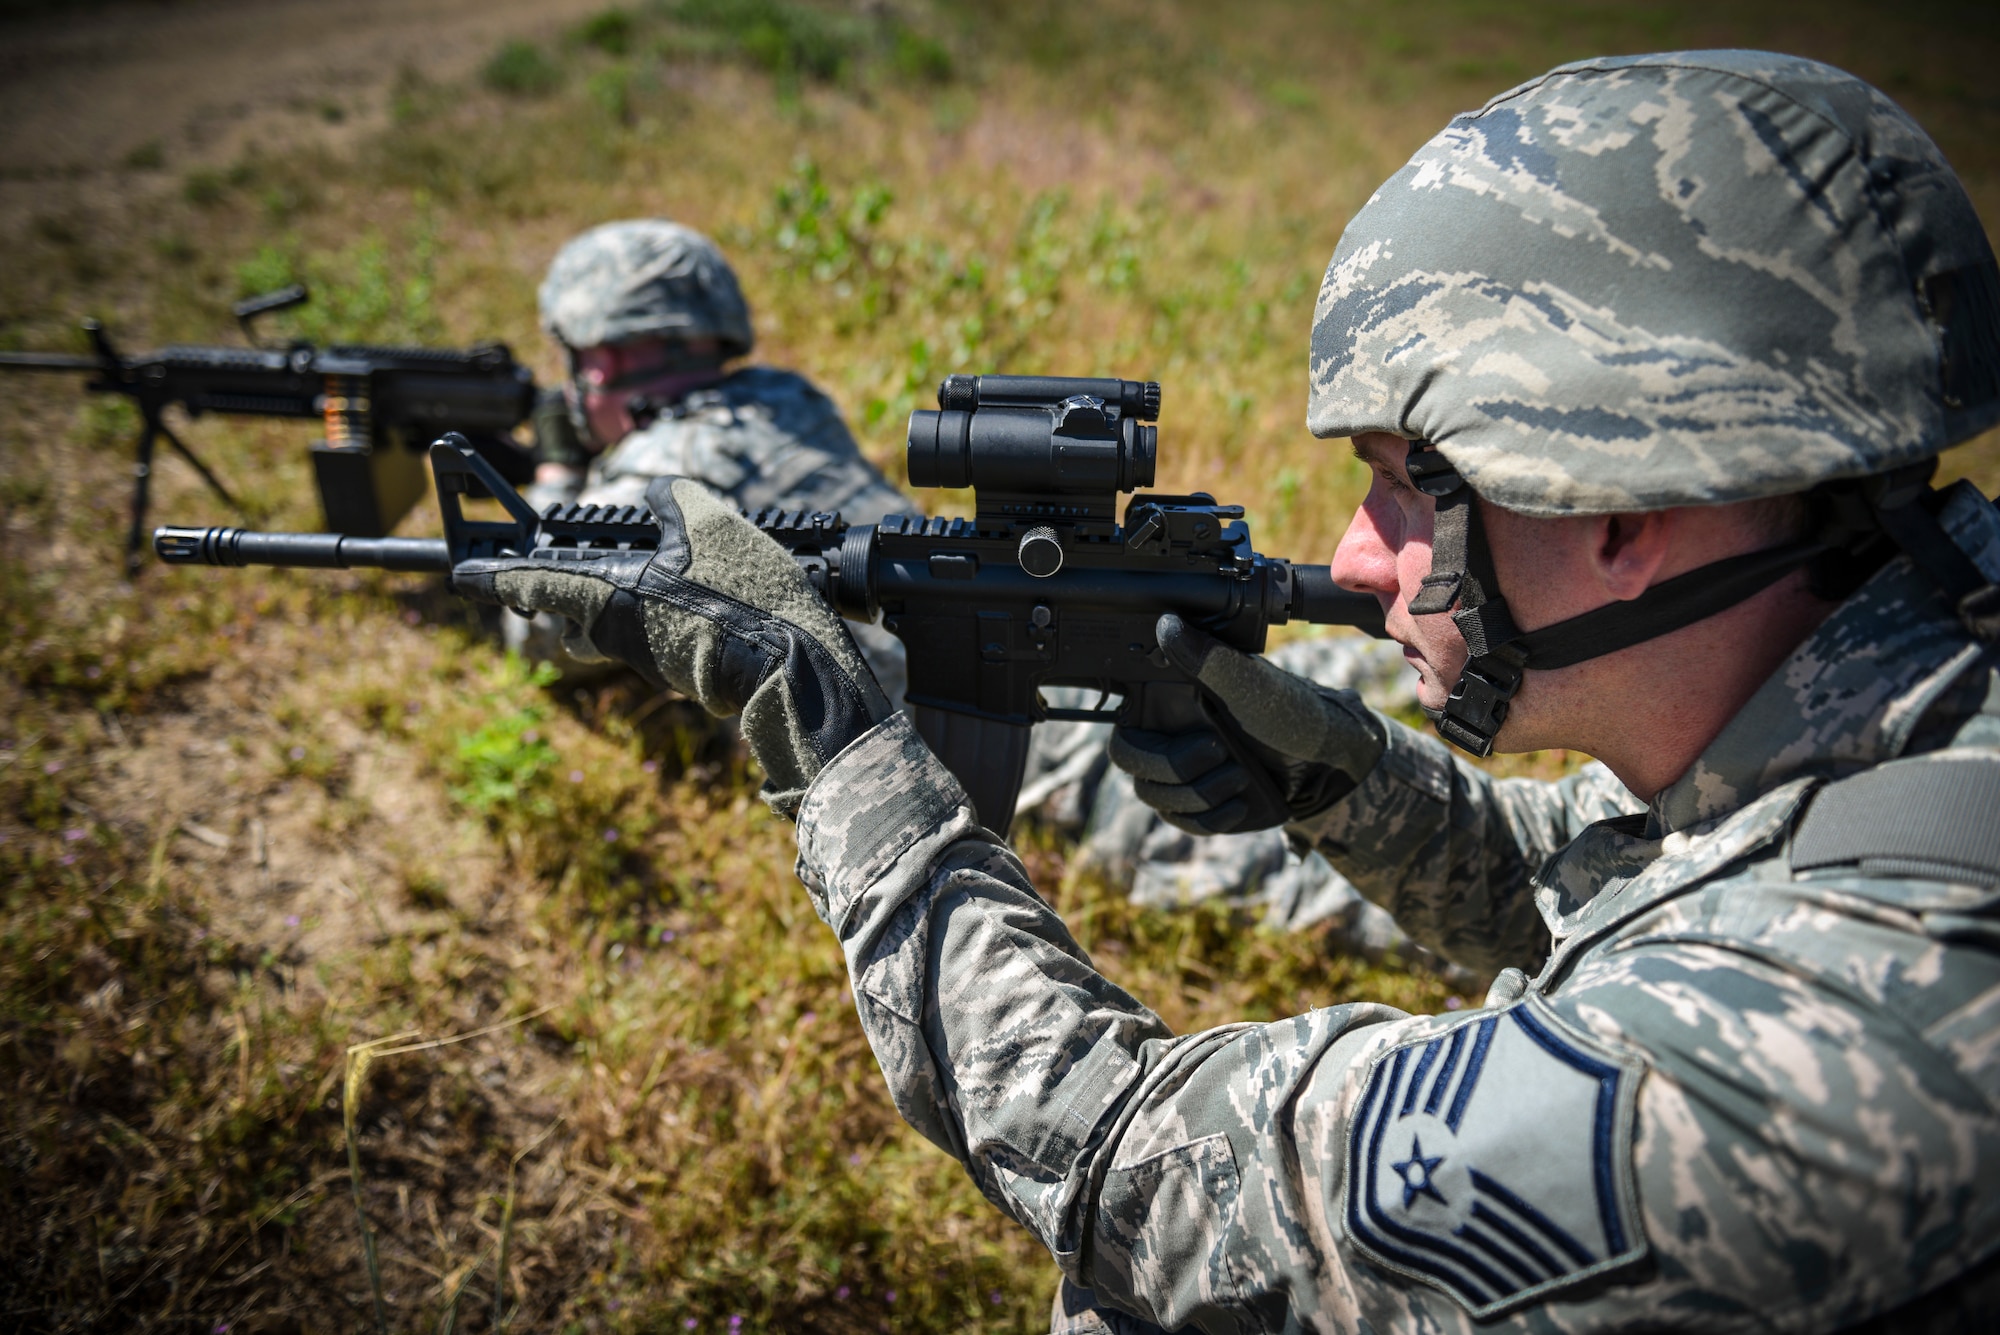 Staff Sgt. Robert Brinton and Master Sgt. David Hasseler, 419th Security Forces Squadron, take aim down range